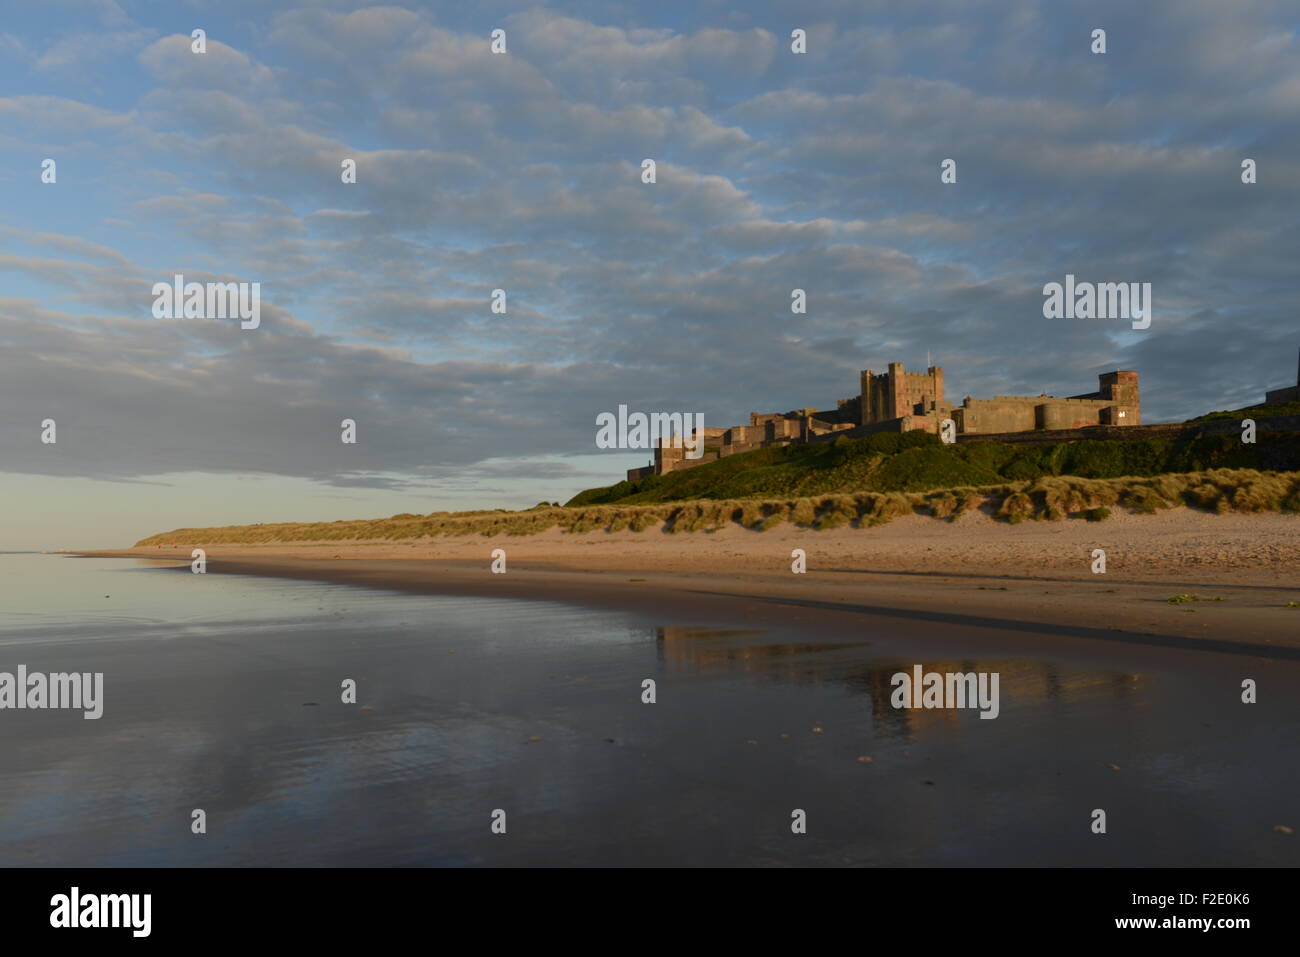 bamburgh castle reflections in a golden sunset Stock Photo